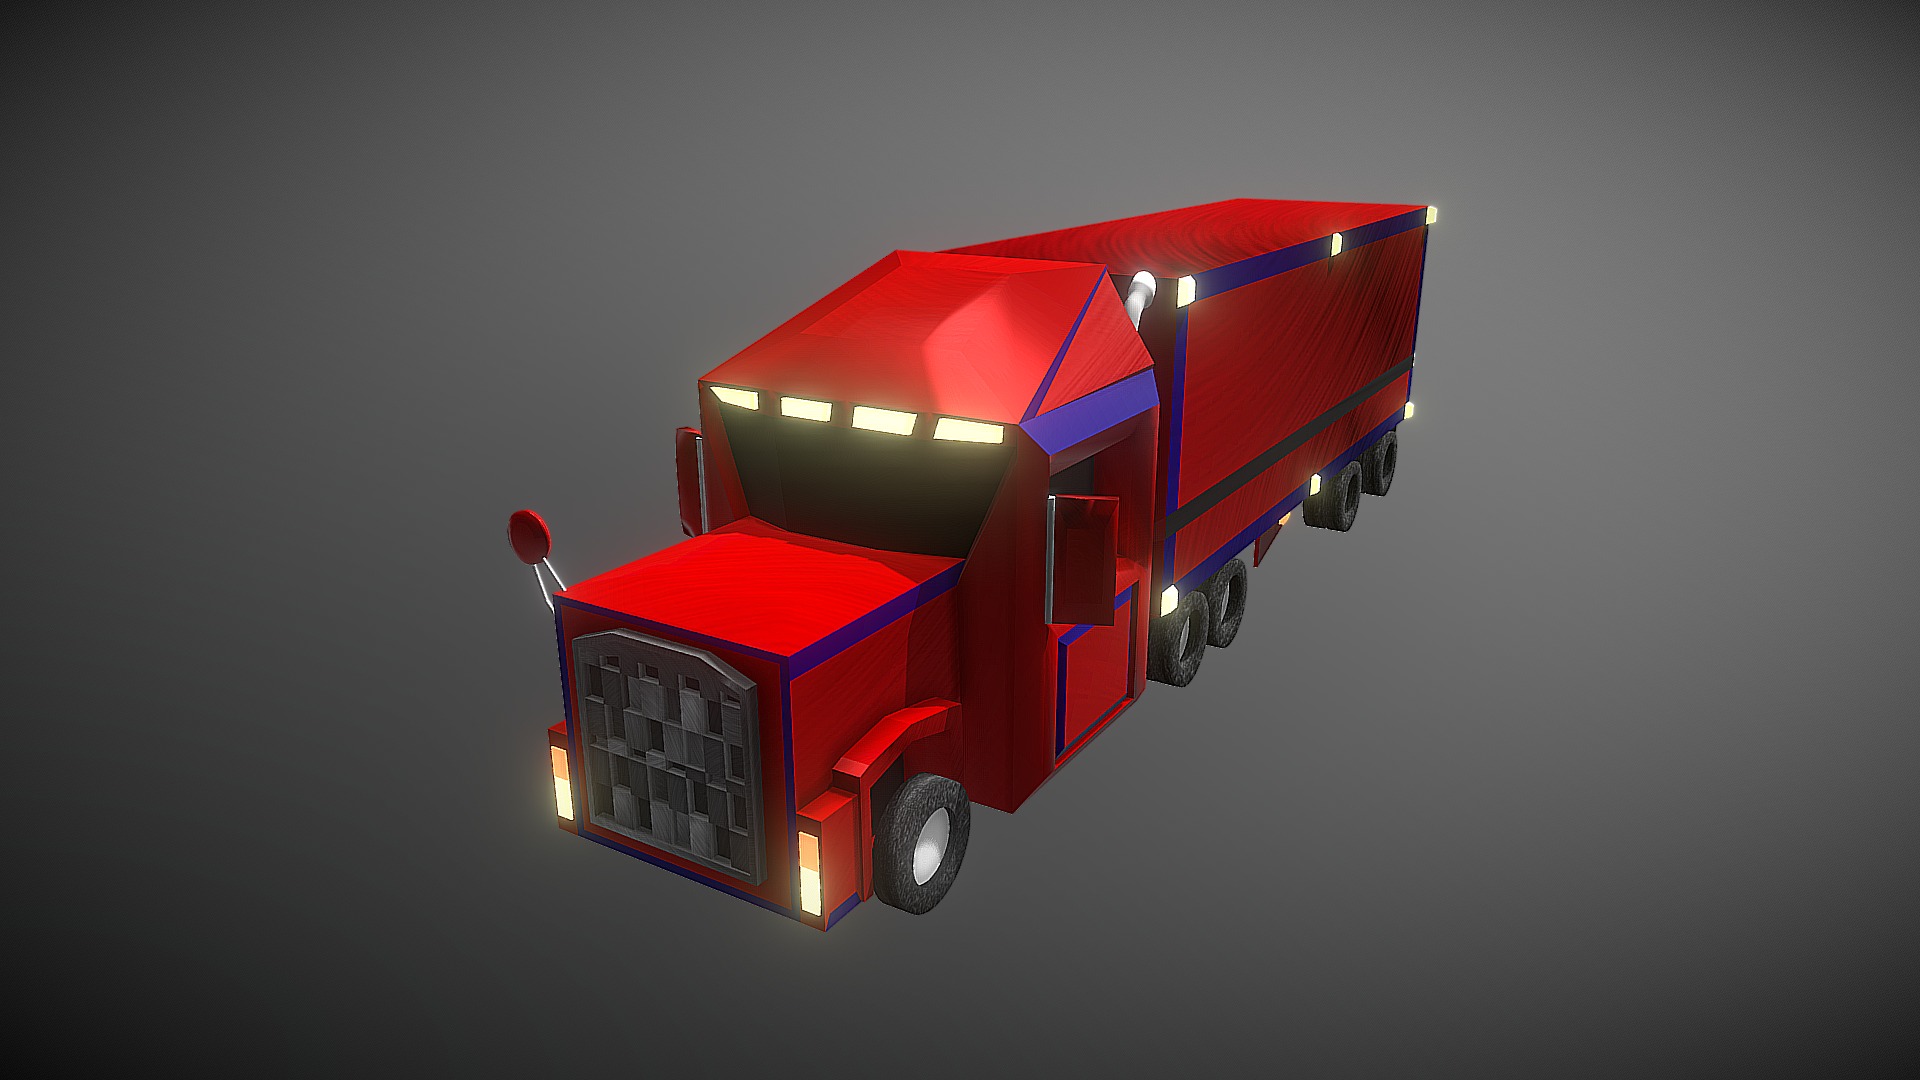 3D model Low Poly Tractor Trailer - This is a 3D model of the Low Poly Tractor Trailer. The 3D model is about a toy fire truck.